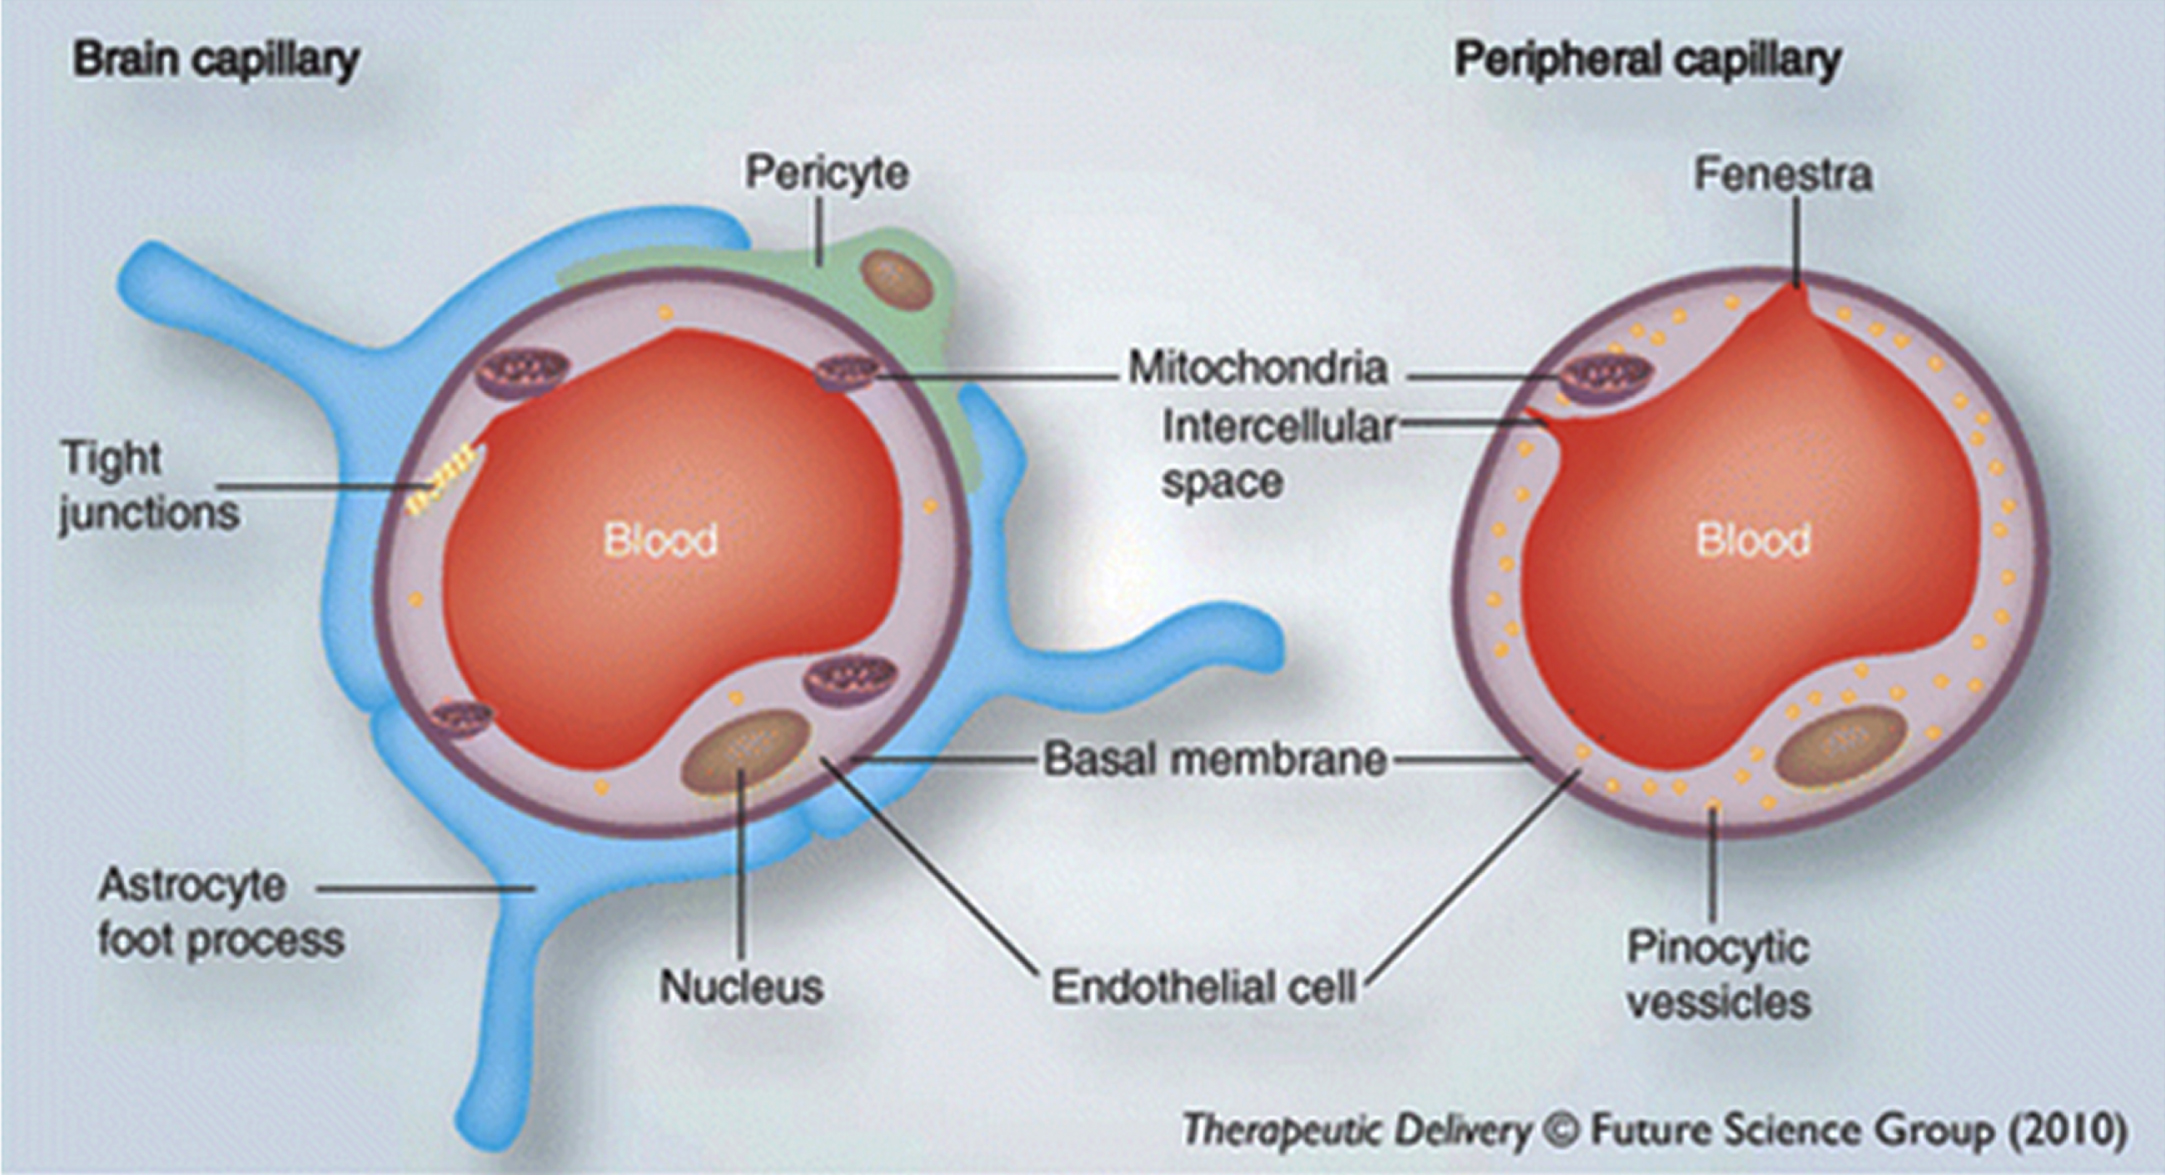 The Blood-brain barrier. The image on the left shows that brain capillaries have a protective layer and other structural arrangements that form the blood-brain barrier, whereas the image on the right shows that peripheral capillaries lack this. Used with permission of Future Science Ltd., from Mittapalli RK, Manda VK, Adkins CE, Geldenhuys WJ, Lockman PR (2010) Exploiting nutrient transporters at the blood– brain barrier to improve brain distribution of small molecules. Ther Deliv 1, 775– 784 [48]; permission conveyed through Copyright Clearance Center, Inc.